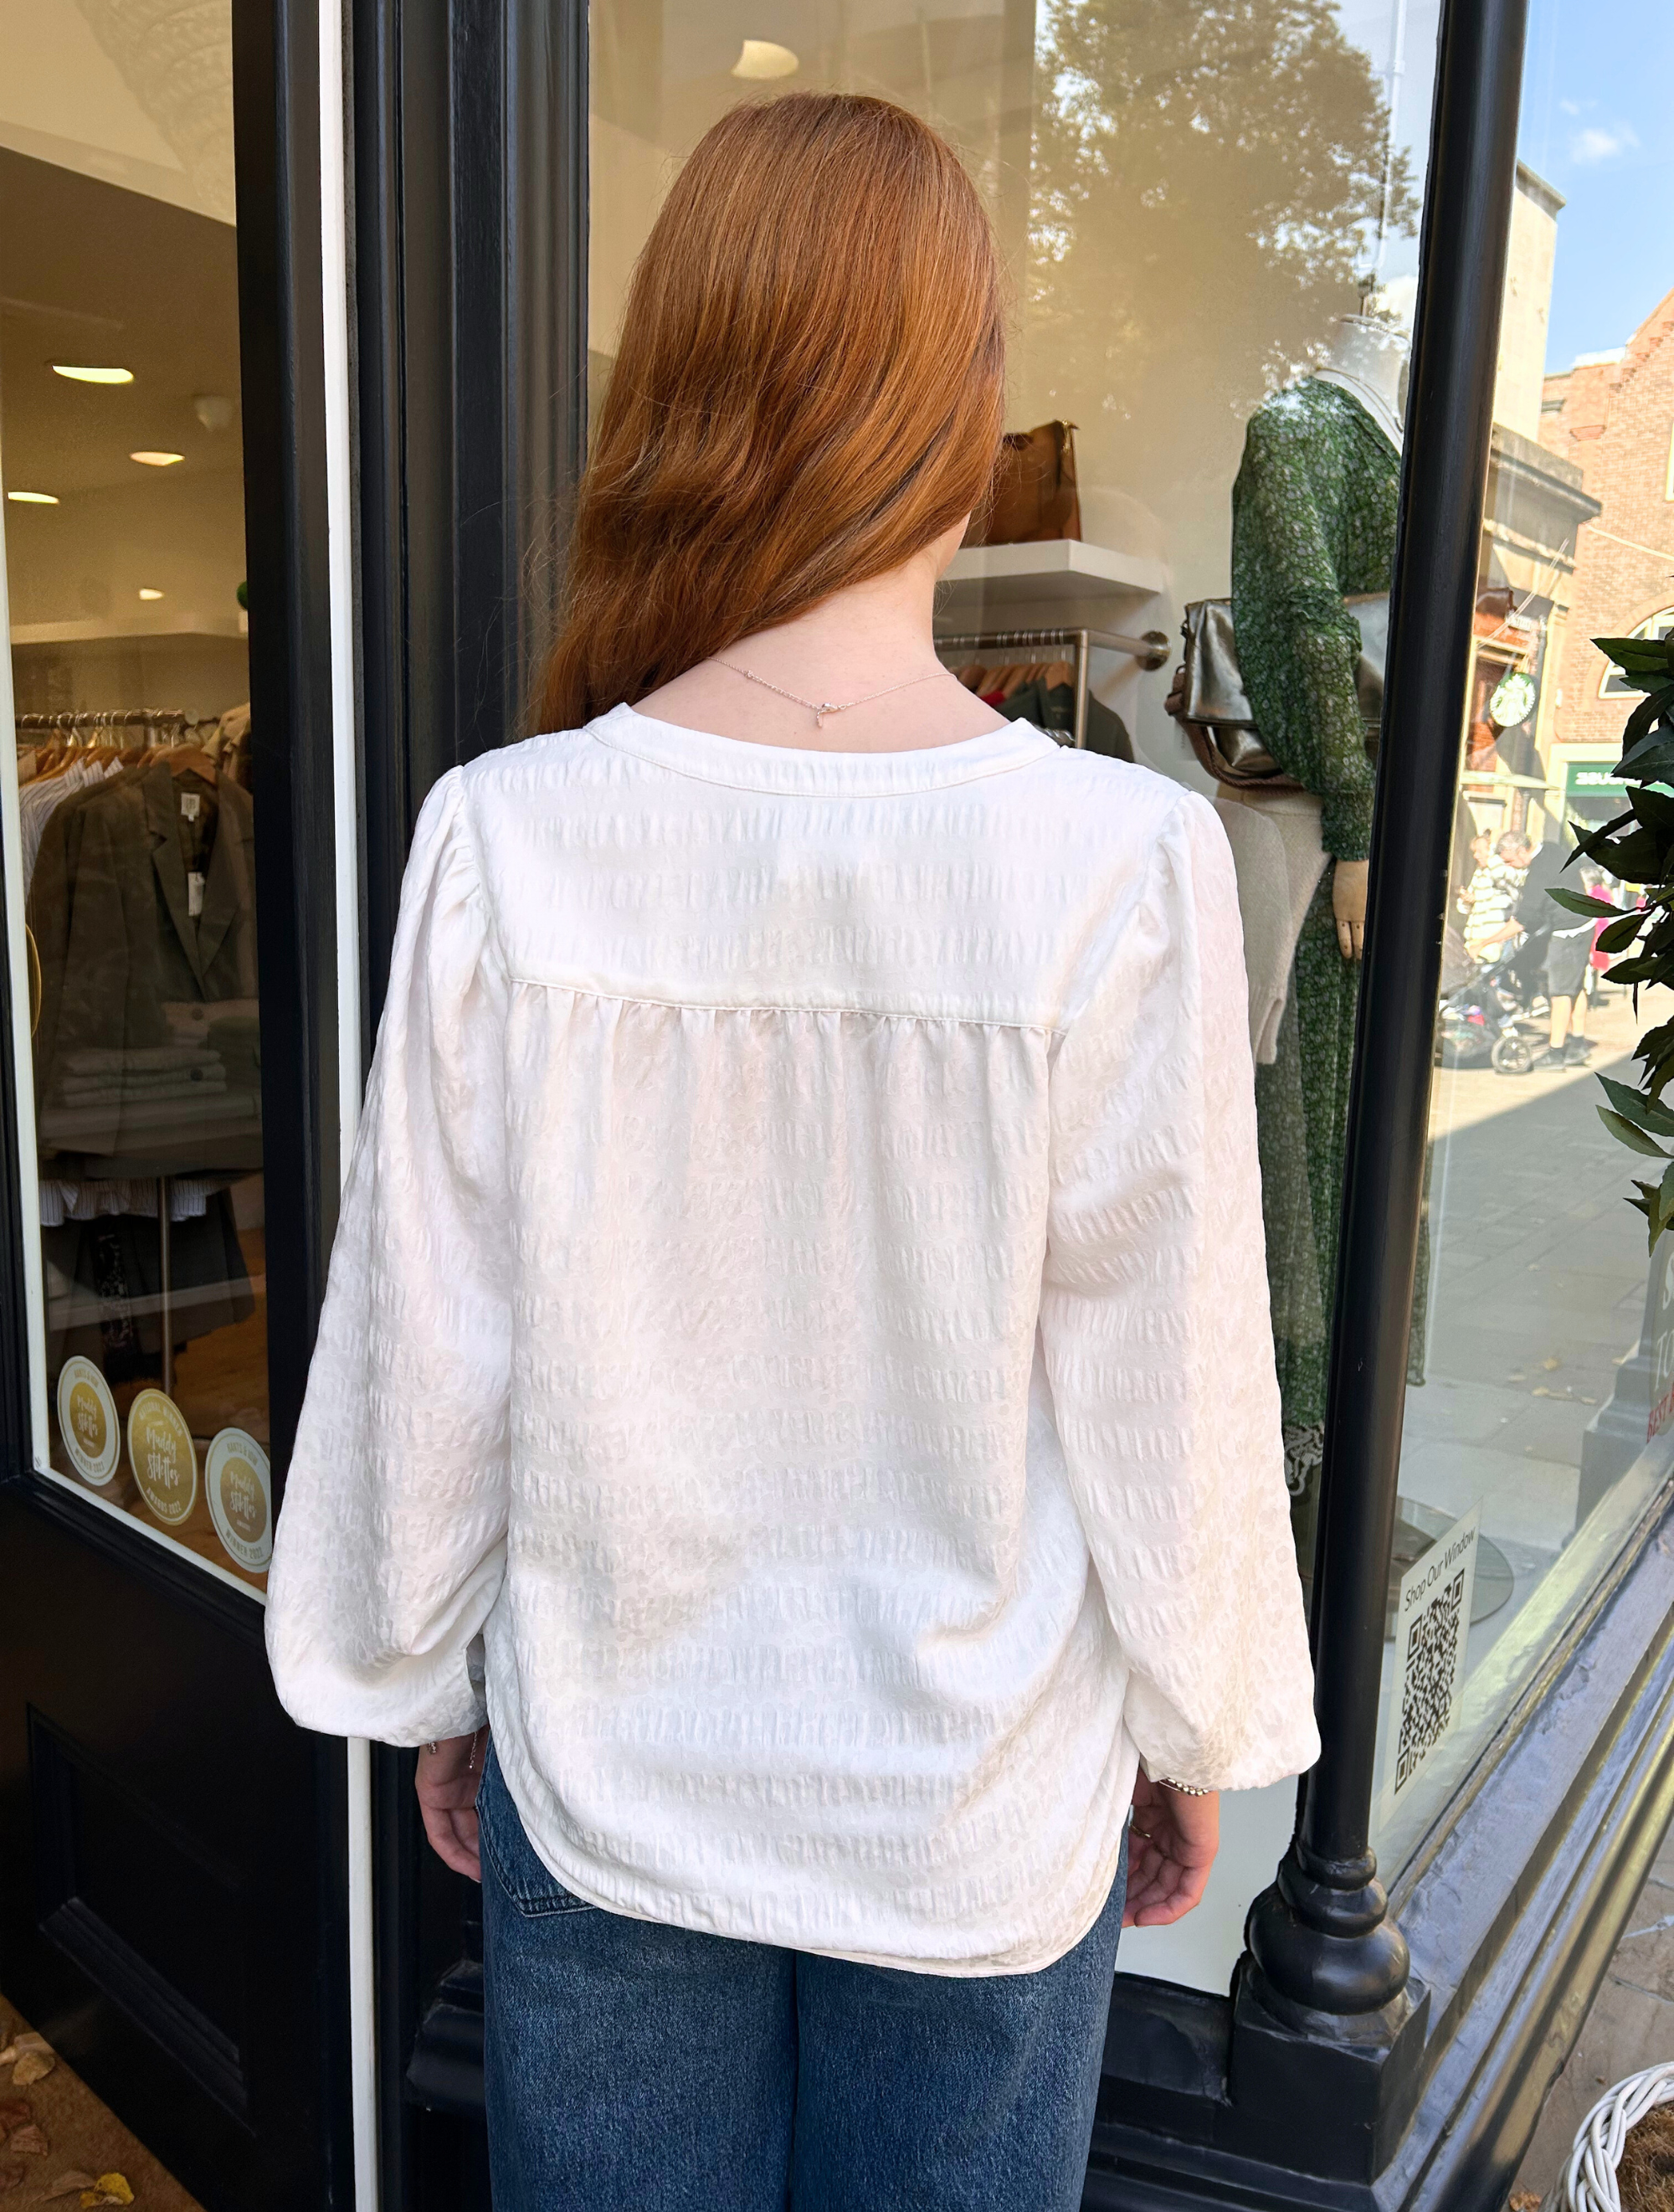 White V neck blouse with seersucker fabric and long balloon sleeves